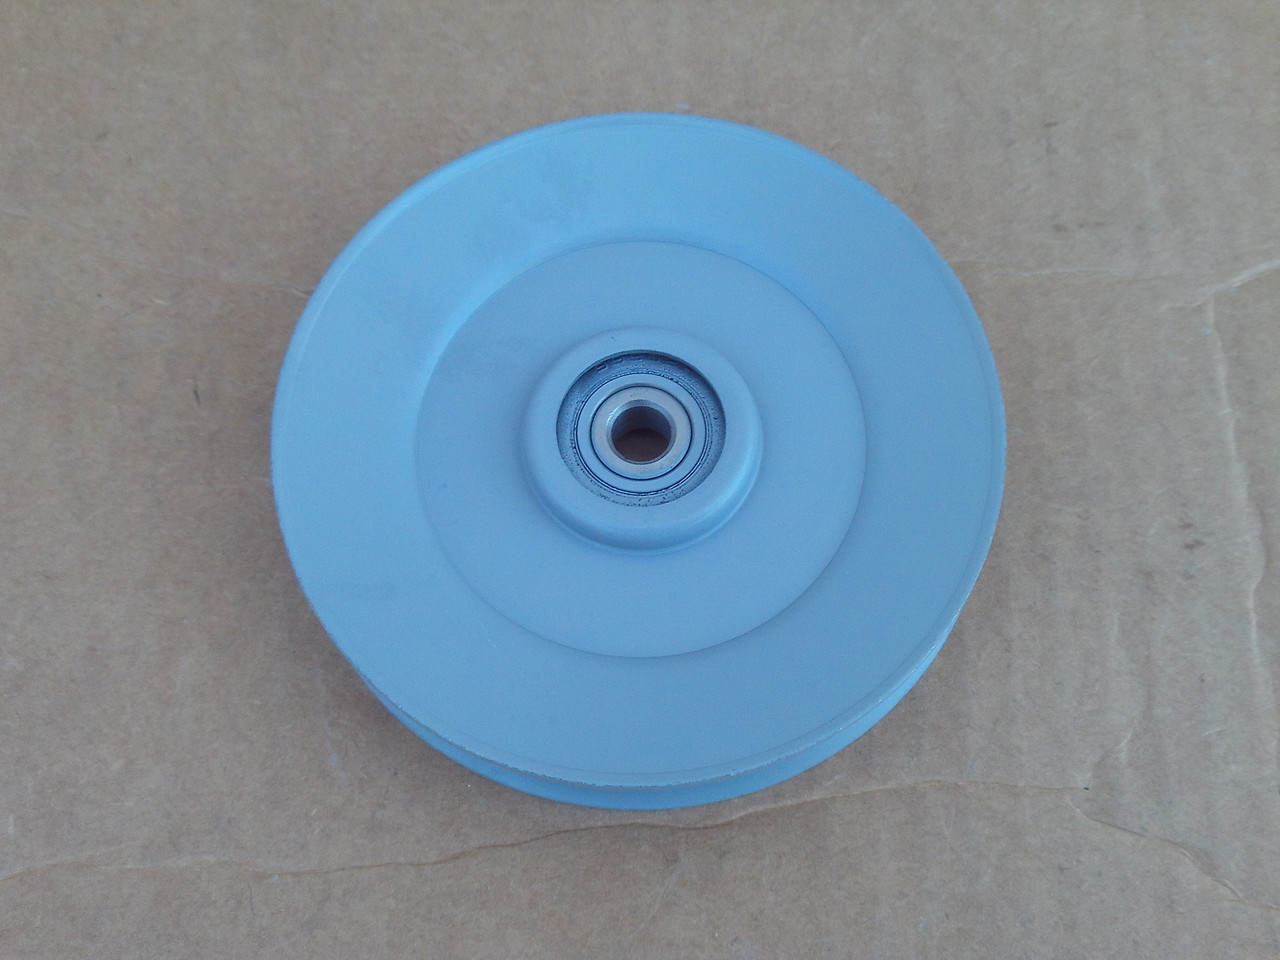 Idler Pulley for Snapper 2101096, 2101096SM, ID: 3/8" OD: 4-1/2"